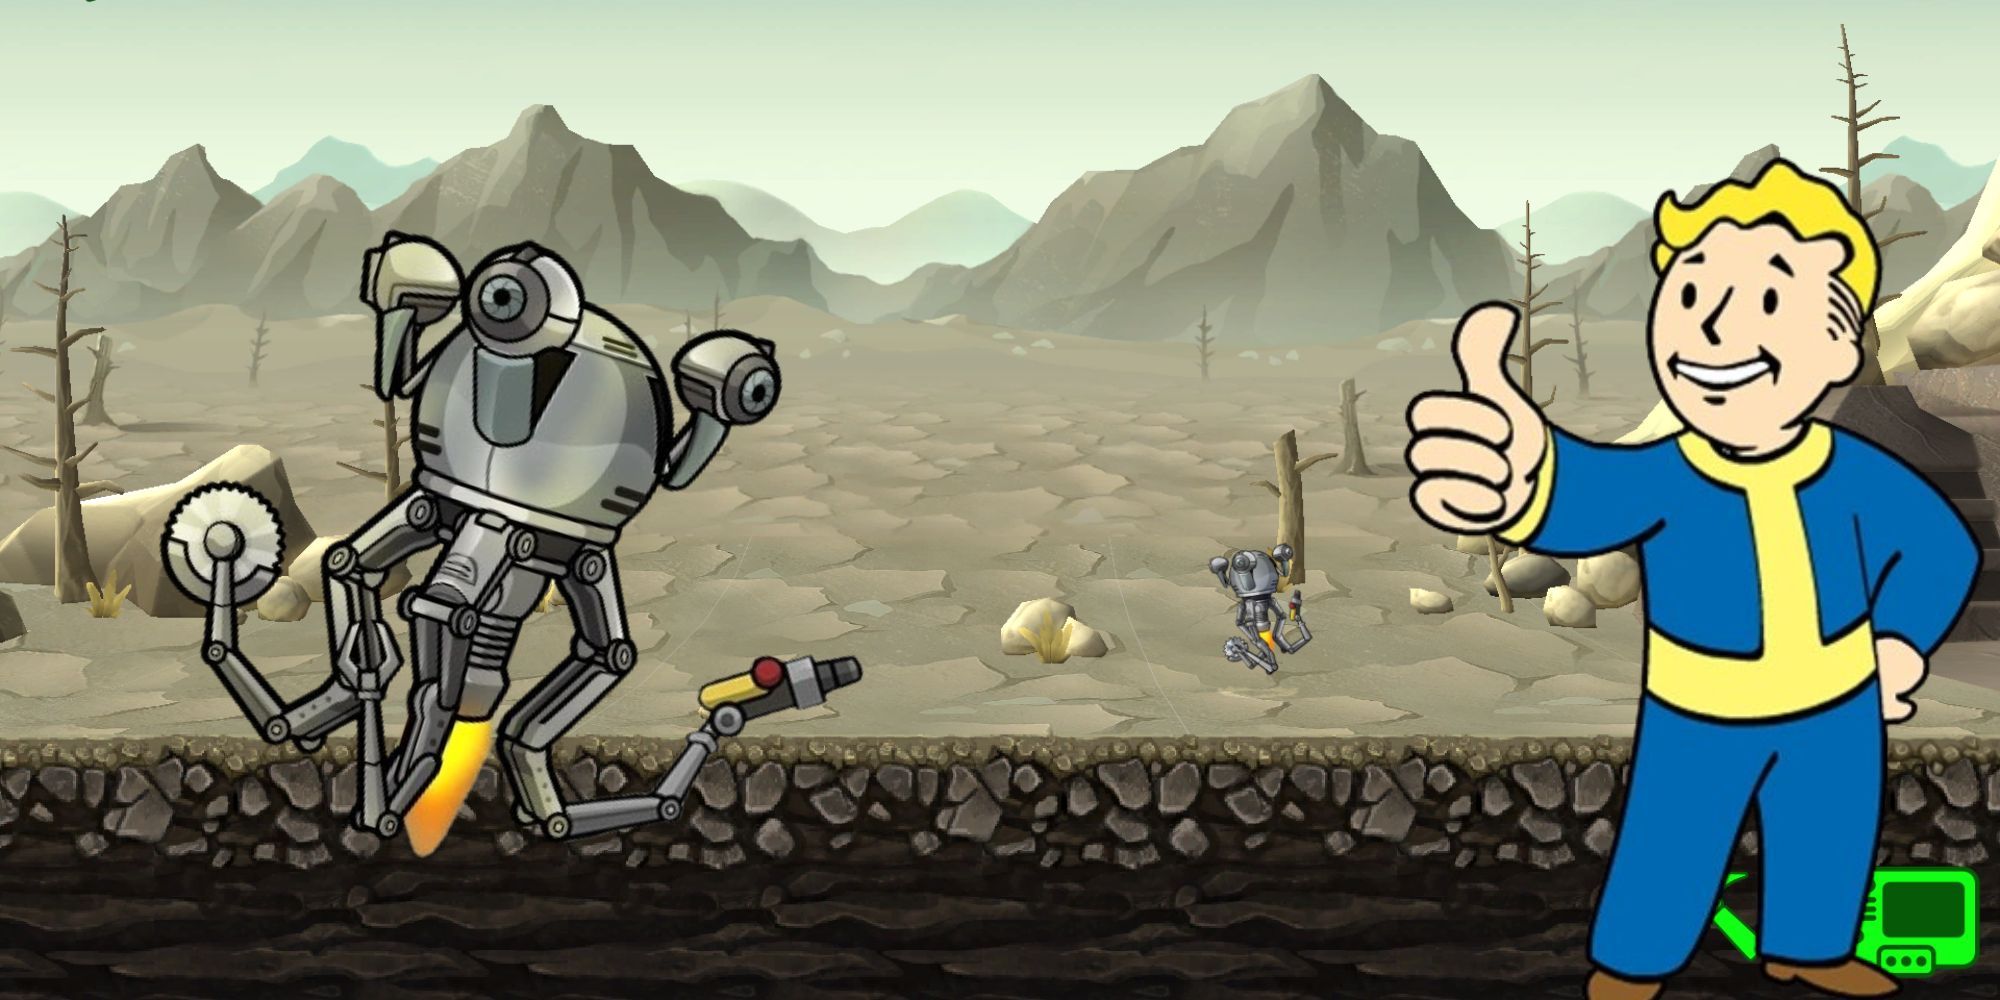 A Mr. Handy making their way into the Wasteland, with another Mr. Handy on the left and a Vault Boy on the right in Fallout Shelter.